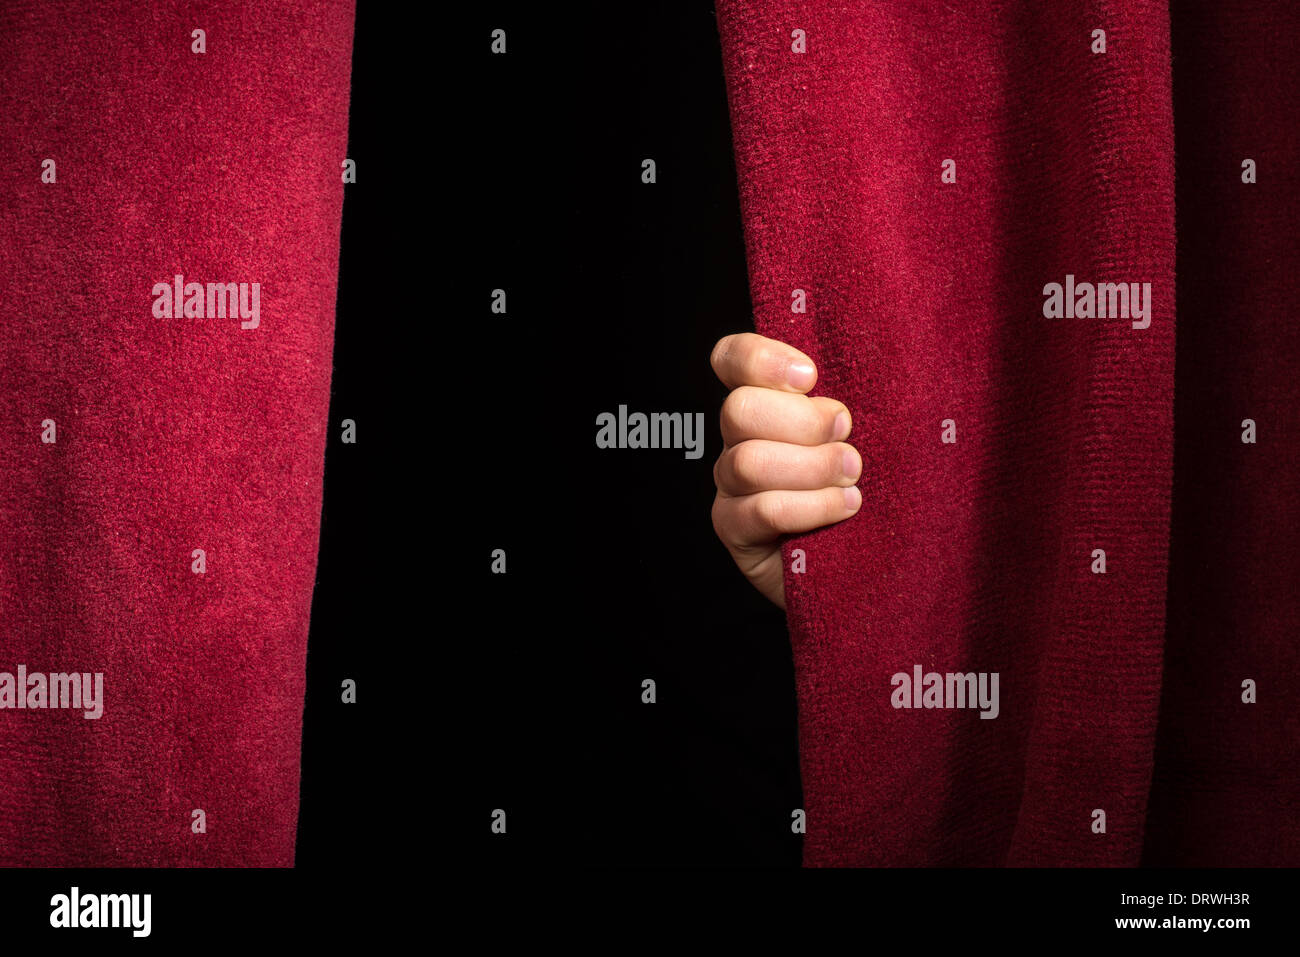 Hand appearing beneath the curtain. Red curtain. Stock Photo